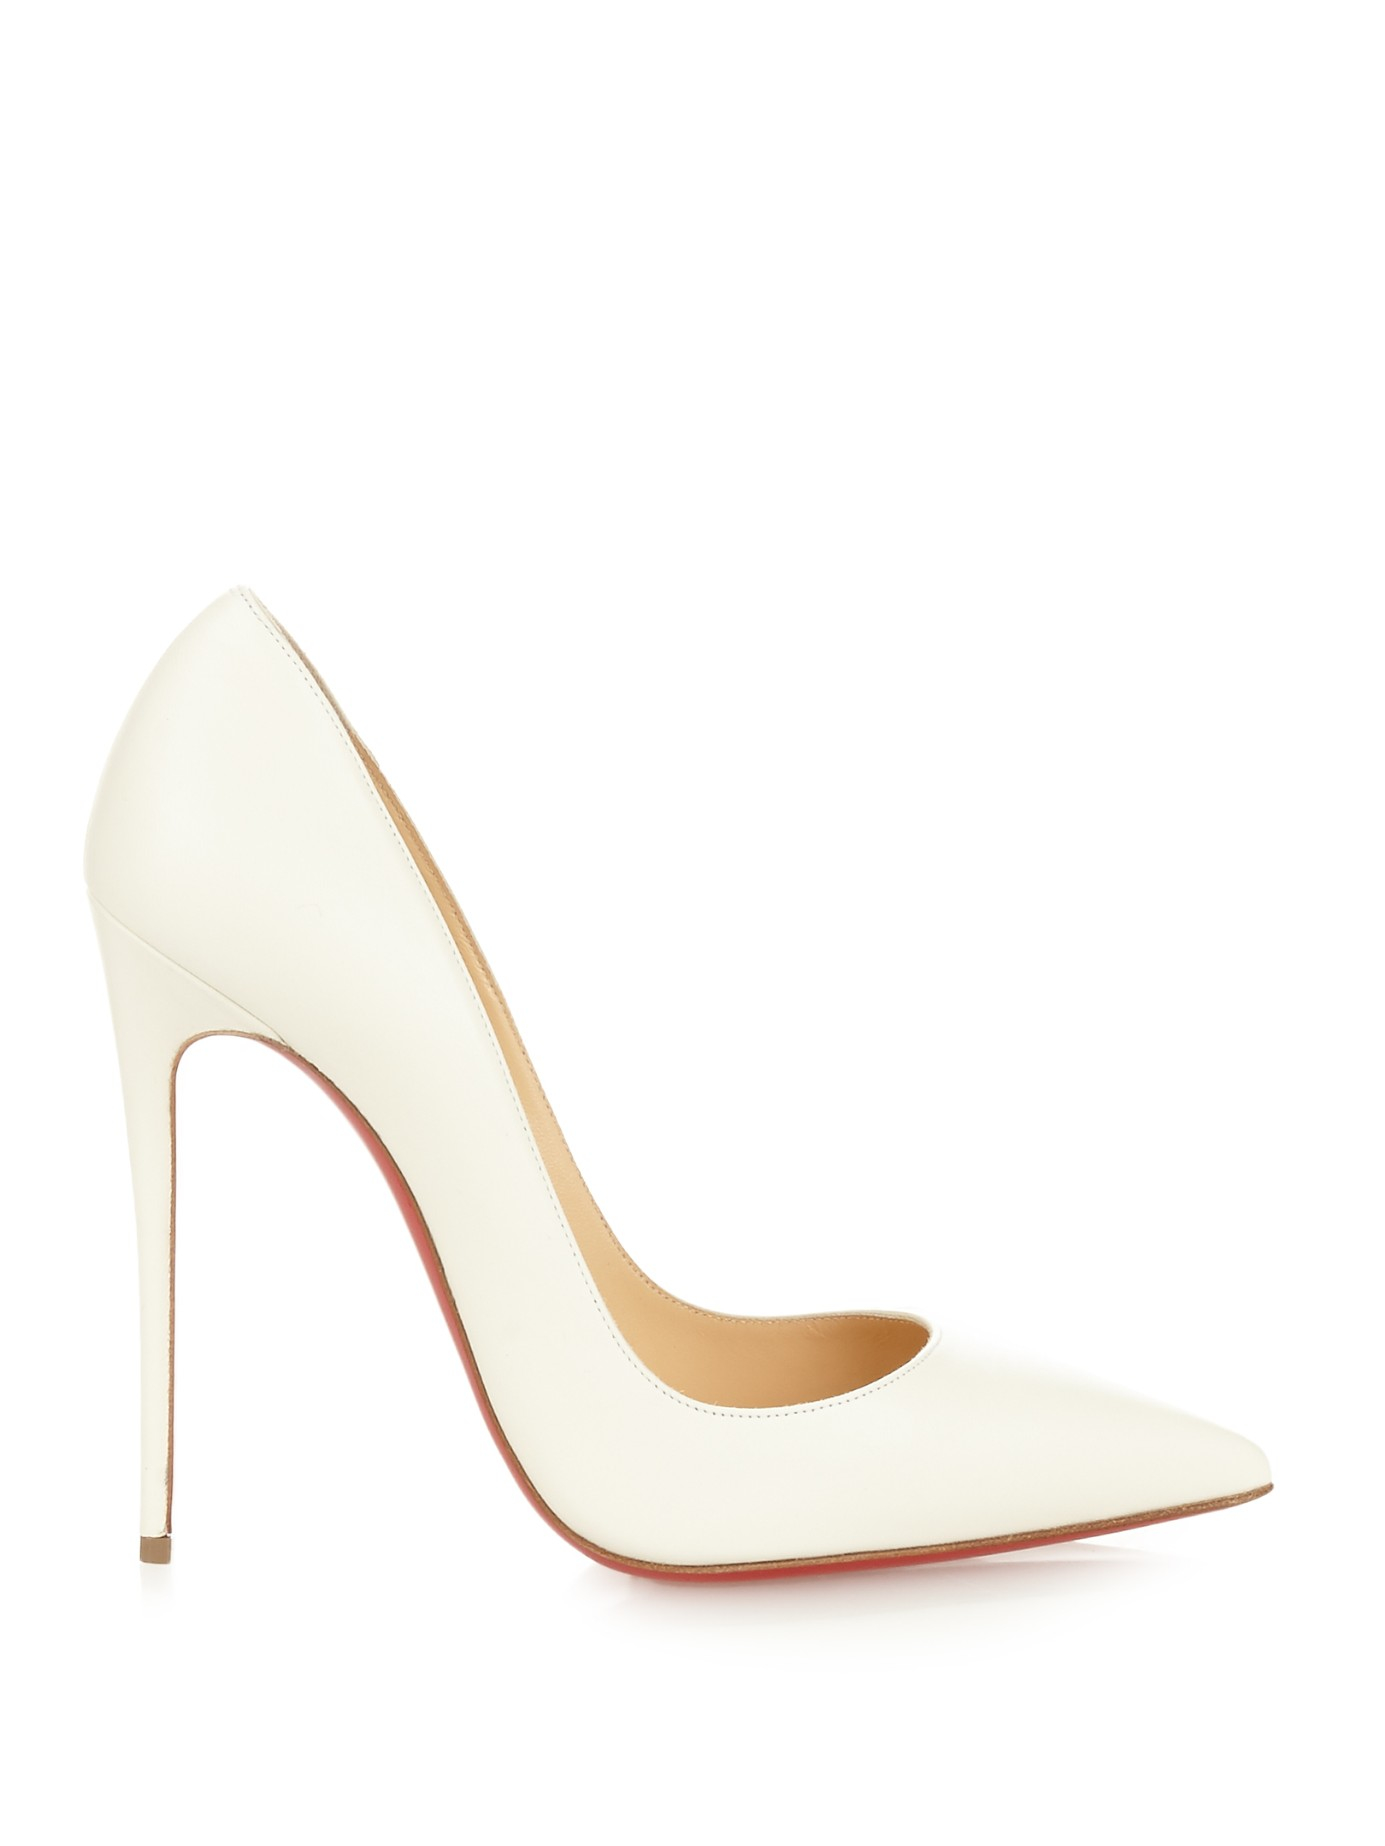 replica shoes christian louboutin - Christian louboutin So Kate Leather Pumps in White | Lyst